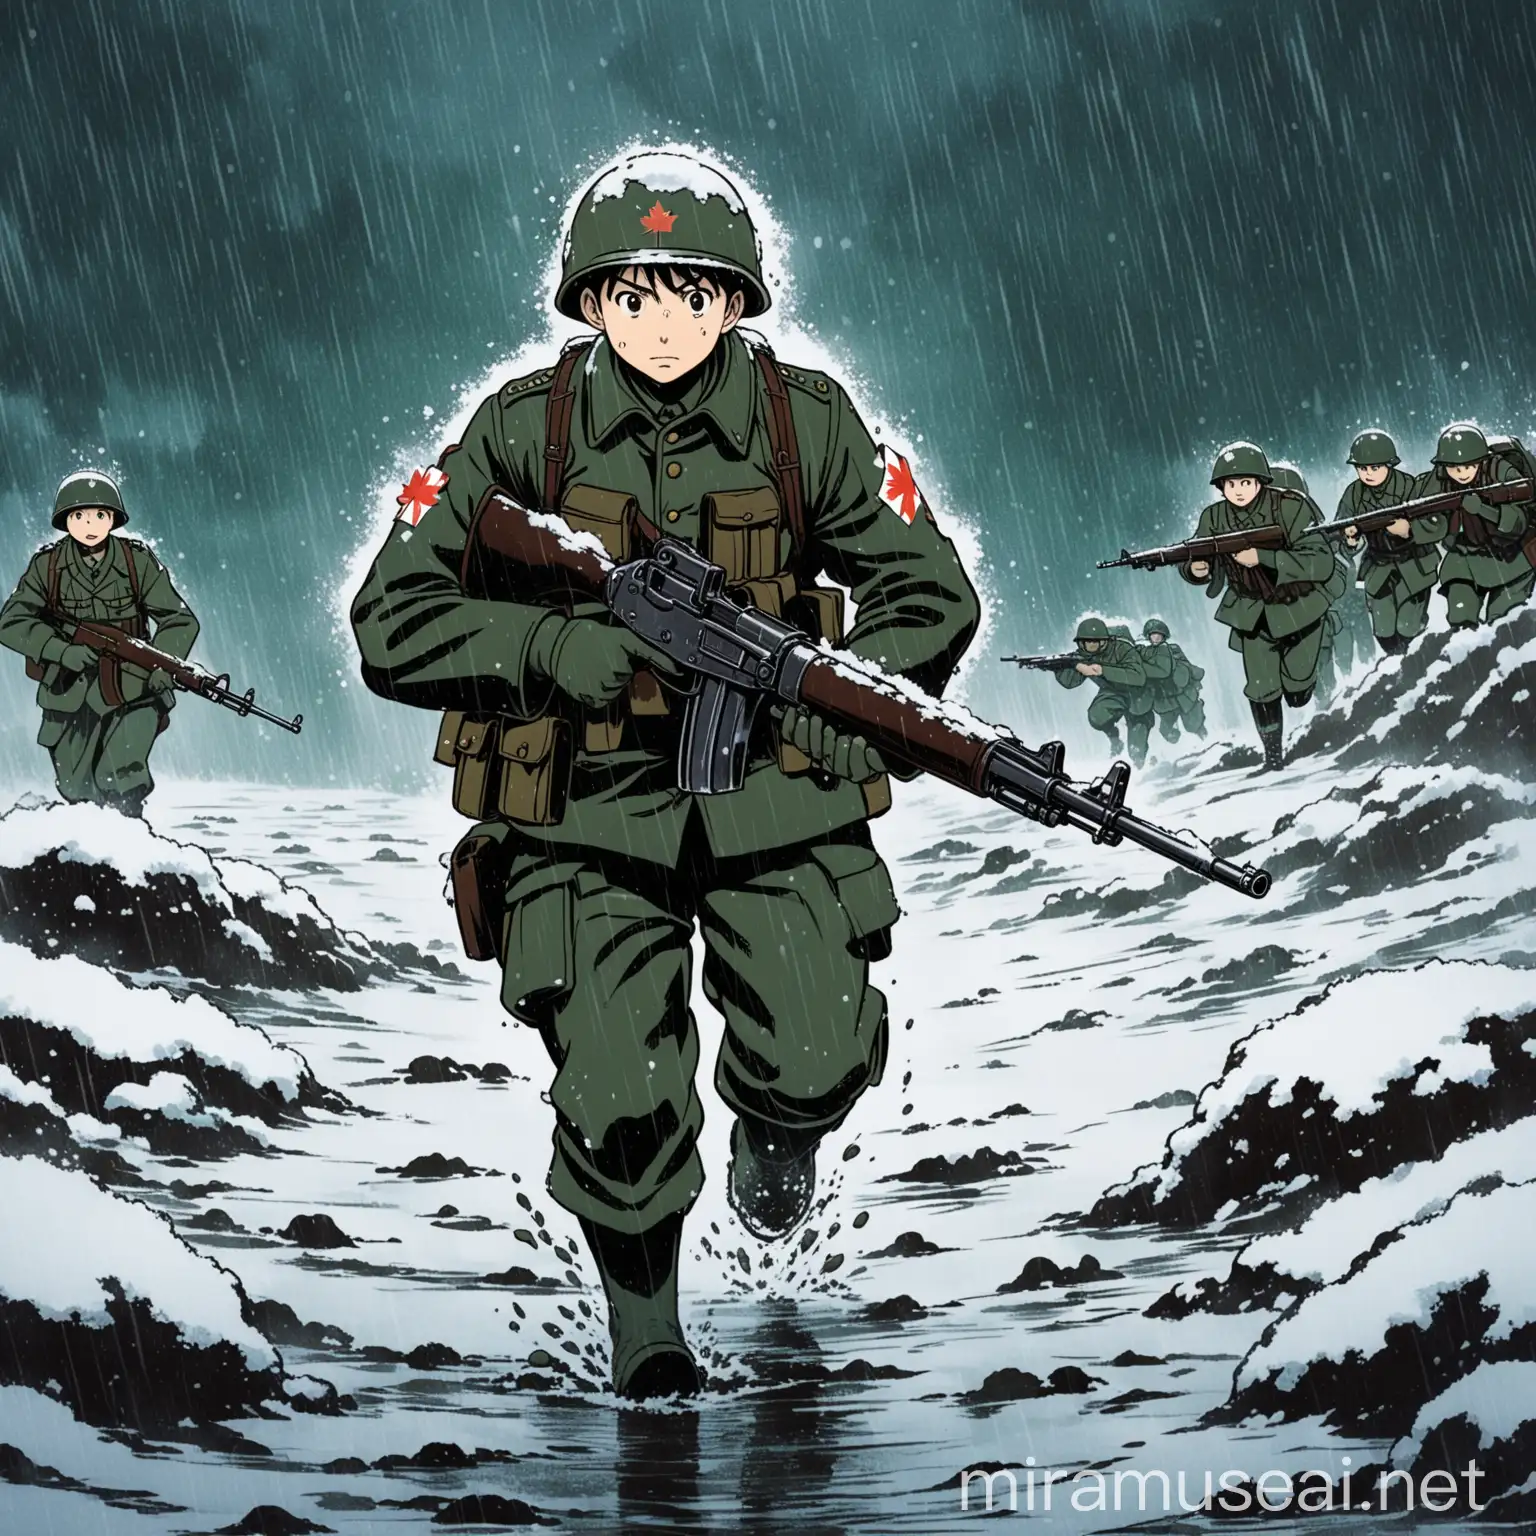 Anime Soldier from Canada in Studio Ghibli Style War Scene